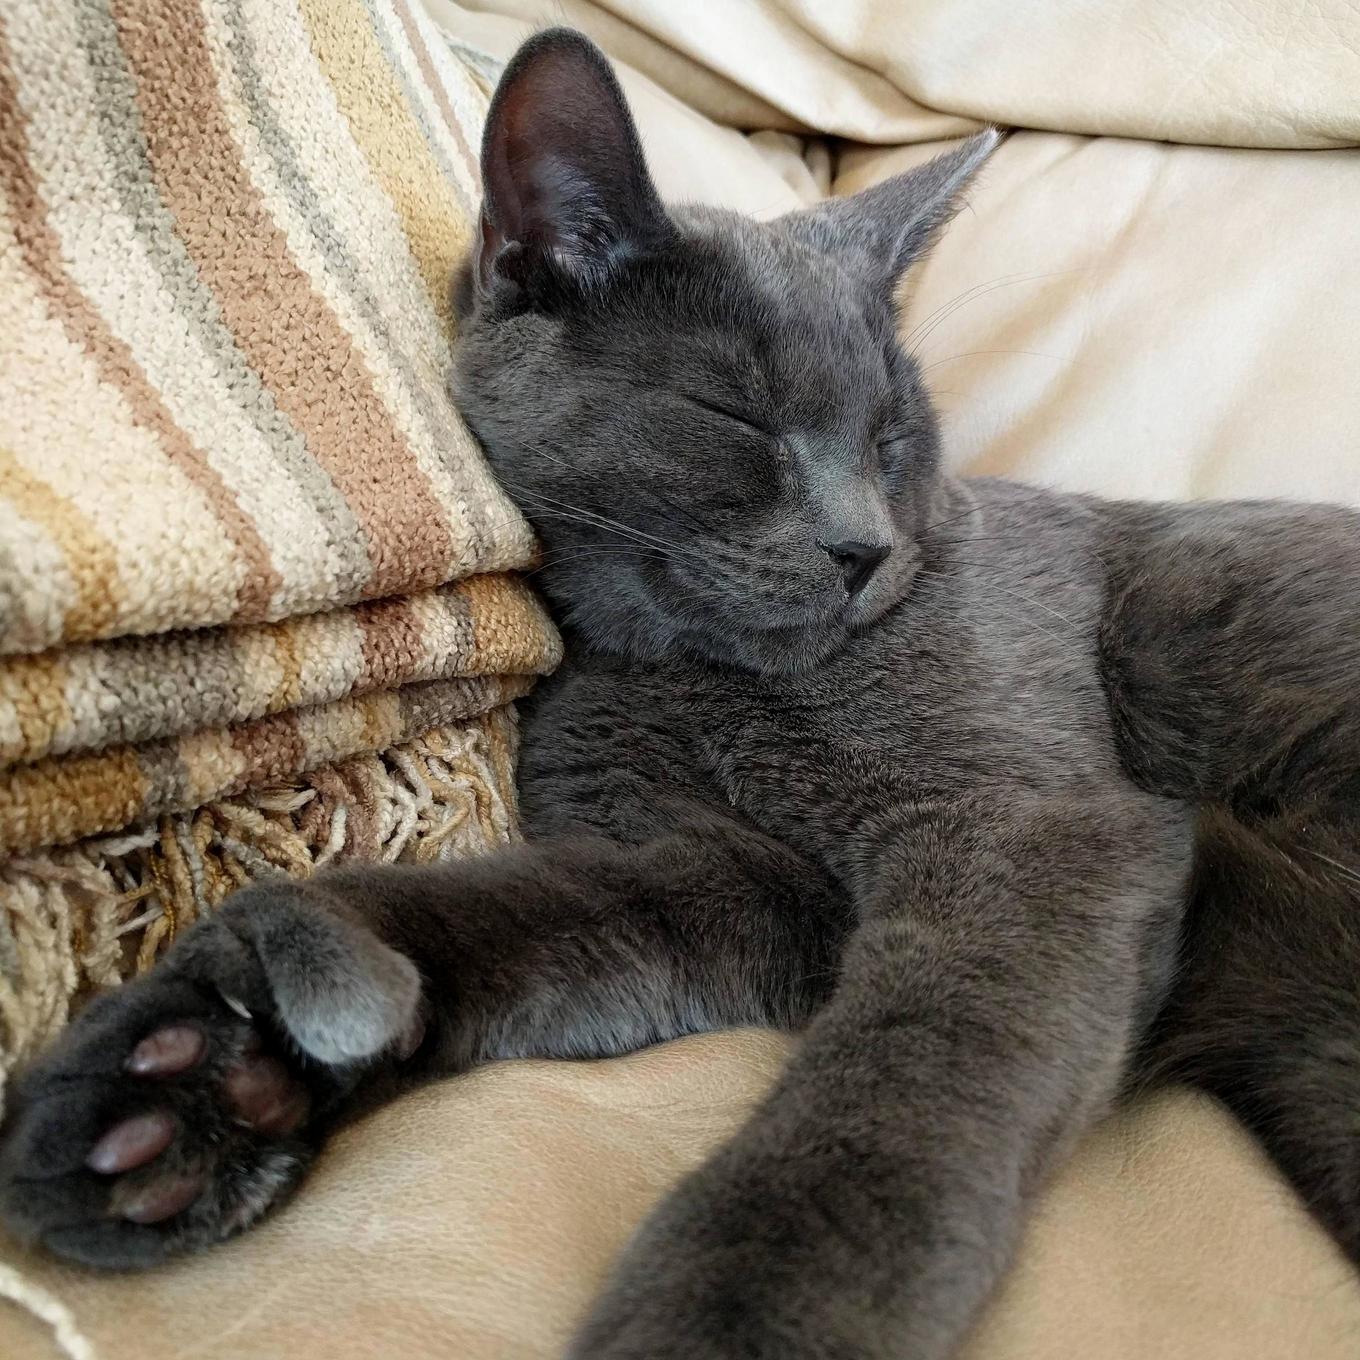 Thumbs up for cat naps